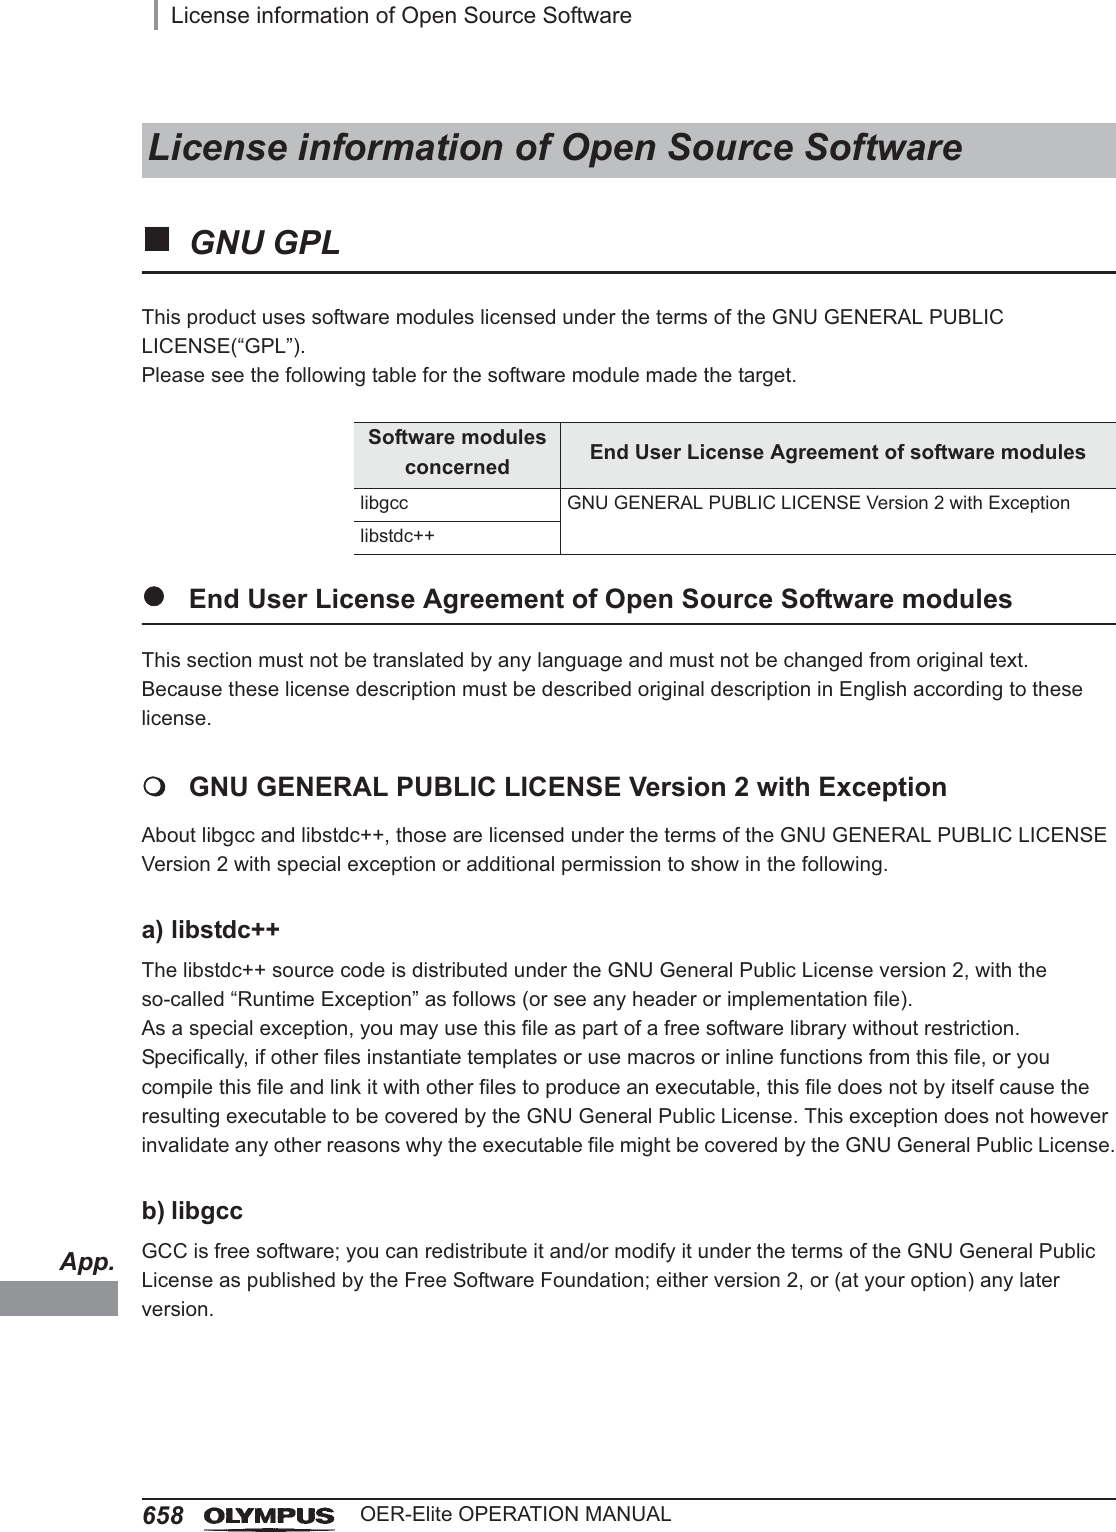 App.658License information of Open Source SoftwareOER-Elite OPERATION MANUALGNU GPLThis product uses software modules licensed under the terms of the GNU GENERAL PUBLIC LICENSE(“GPL”).Please see the following table for the software module made the target.zEnd User License Agreement of Open Source Software modulesThis section must not be translated by any language and must not be changed from original text.Because these license description must be described original description in English according to these license.GNU GENERAL PUBLIC LICENSE Version 2 with ExceptionAbout libgcc and libstdc++, those are licensed under the terms of the GNU GENERAL PUBLIC LICENSE Version 2 with special exception or additional permission to show in the following.a) libstdc++The libstdc++ source code is distributed under the GNU General Public License version 2, with the so-called “Runtime Exception” as follows (or see any header or implementation file). As a special exception, you may use this file as part of a free software library without restriction. Specifically, if other files instantiate templates or use macros or inline functions from this file, or you compile this file and link it with other files to produce an executable, this file does not by itself cause the resulting executable to be covered by the GNU General Public License. This exception does not however invalidate any other reasons why the executable file might be covered by the GNU General Public License.b) libgccGCC is free software; you can redistribute it and/or modify it under the terms of the GNU General Public License as published by the Free Software Foundation; either version 2, or (at your option) any later version.License information of Open Source SoftwareSoftware modules concerned End User License Agreement of software moduleslibgcc GNU GENERAL PUBLIC LICENSE Version 2 with Exceptionlibstdc++